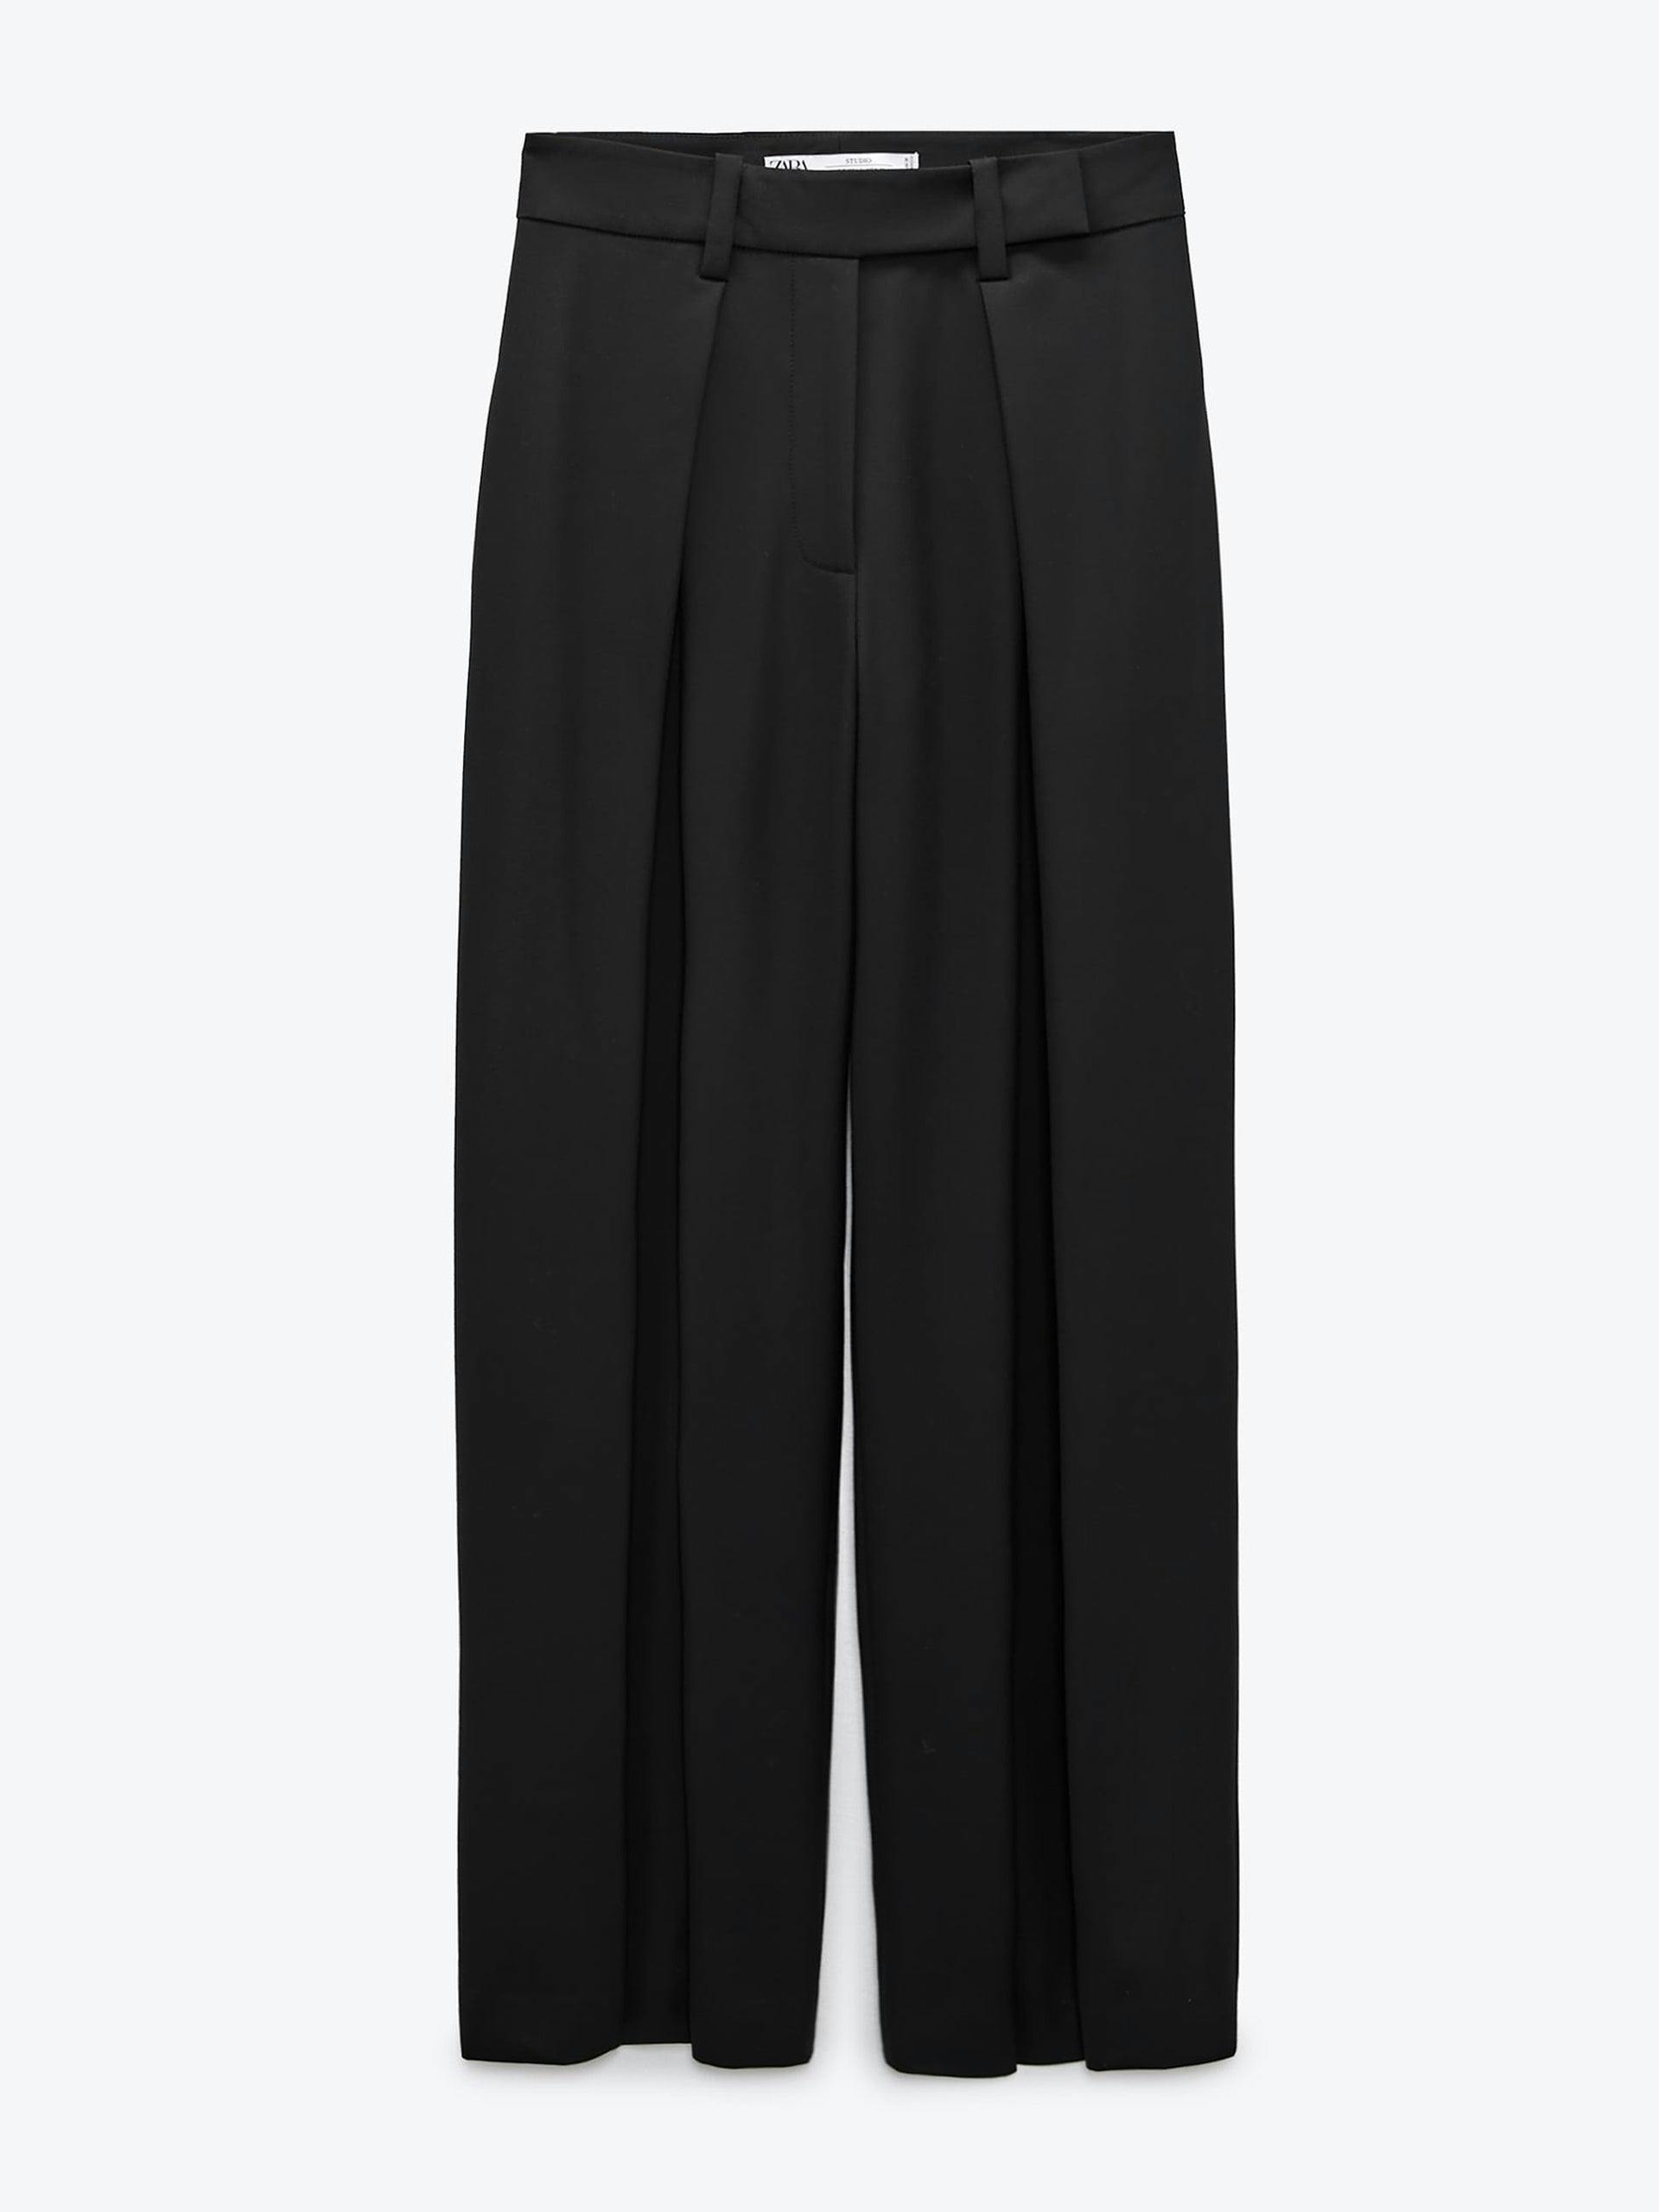 Oversized black trousers